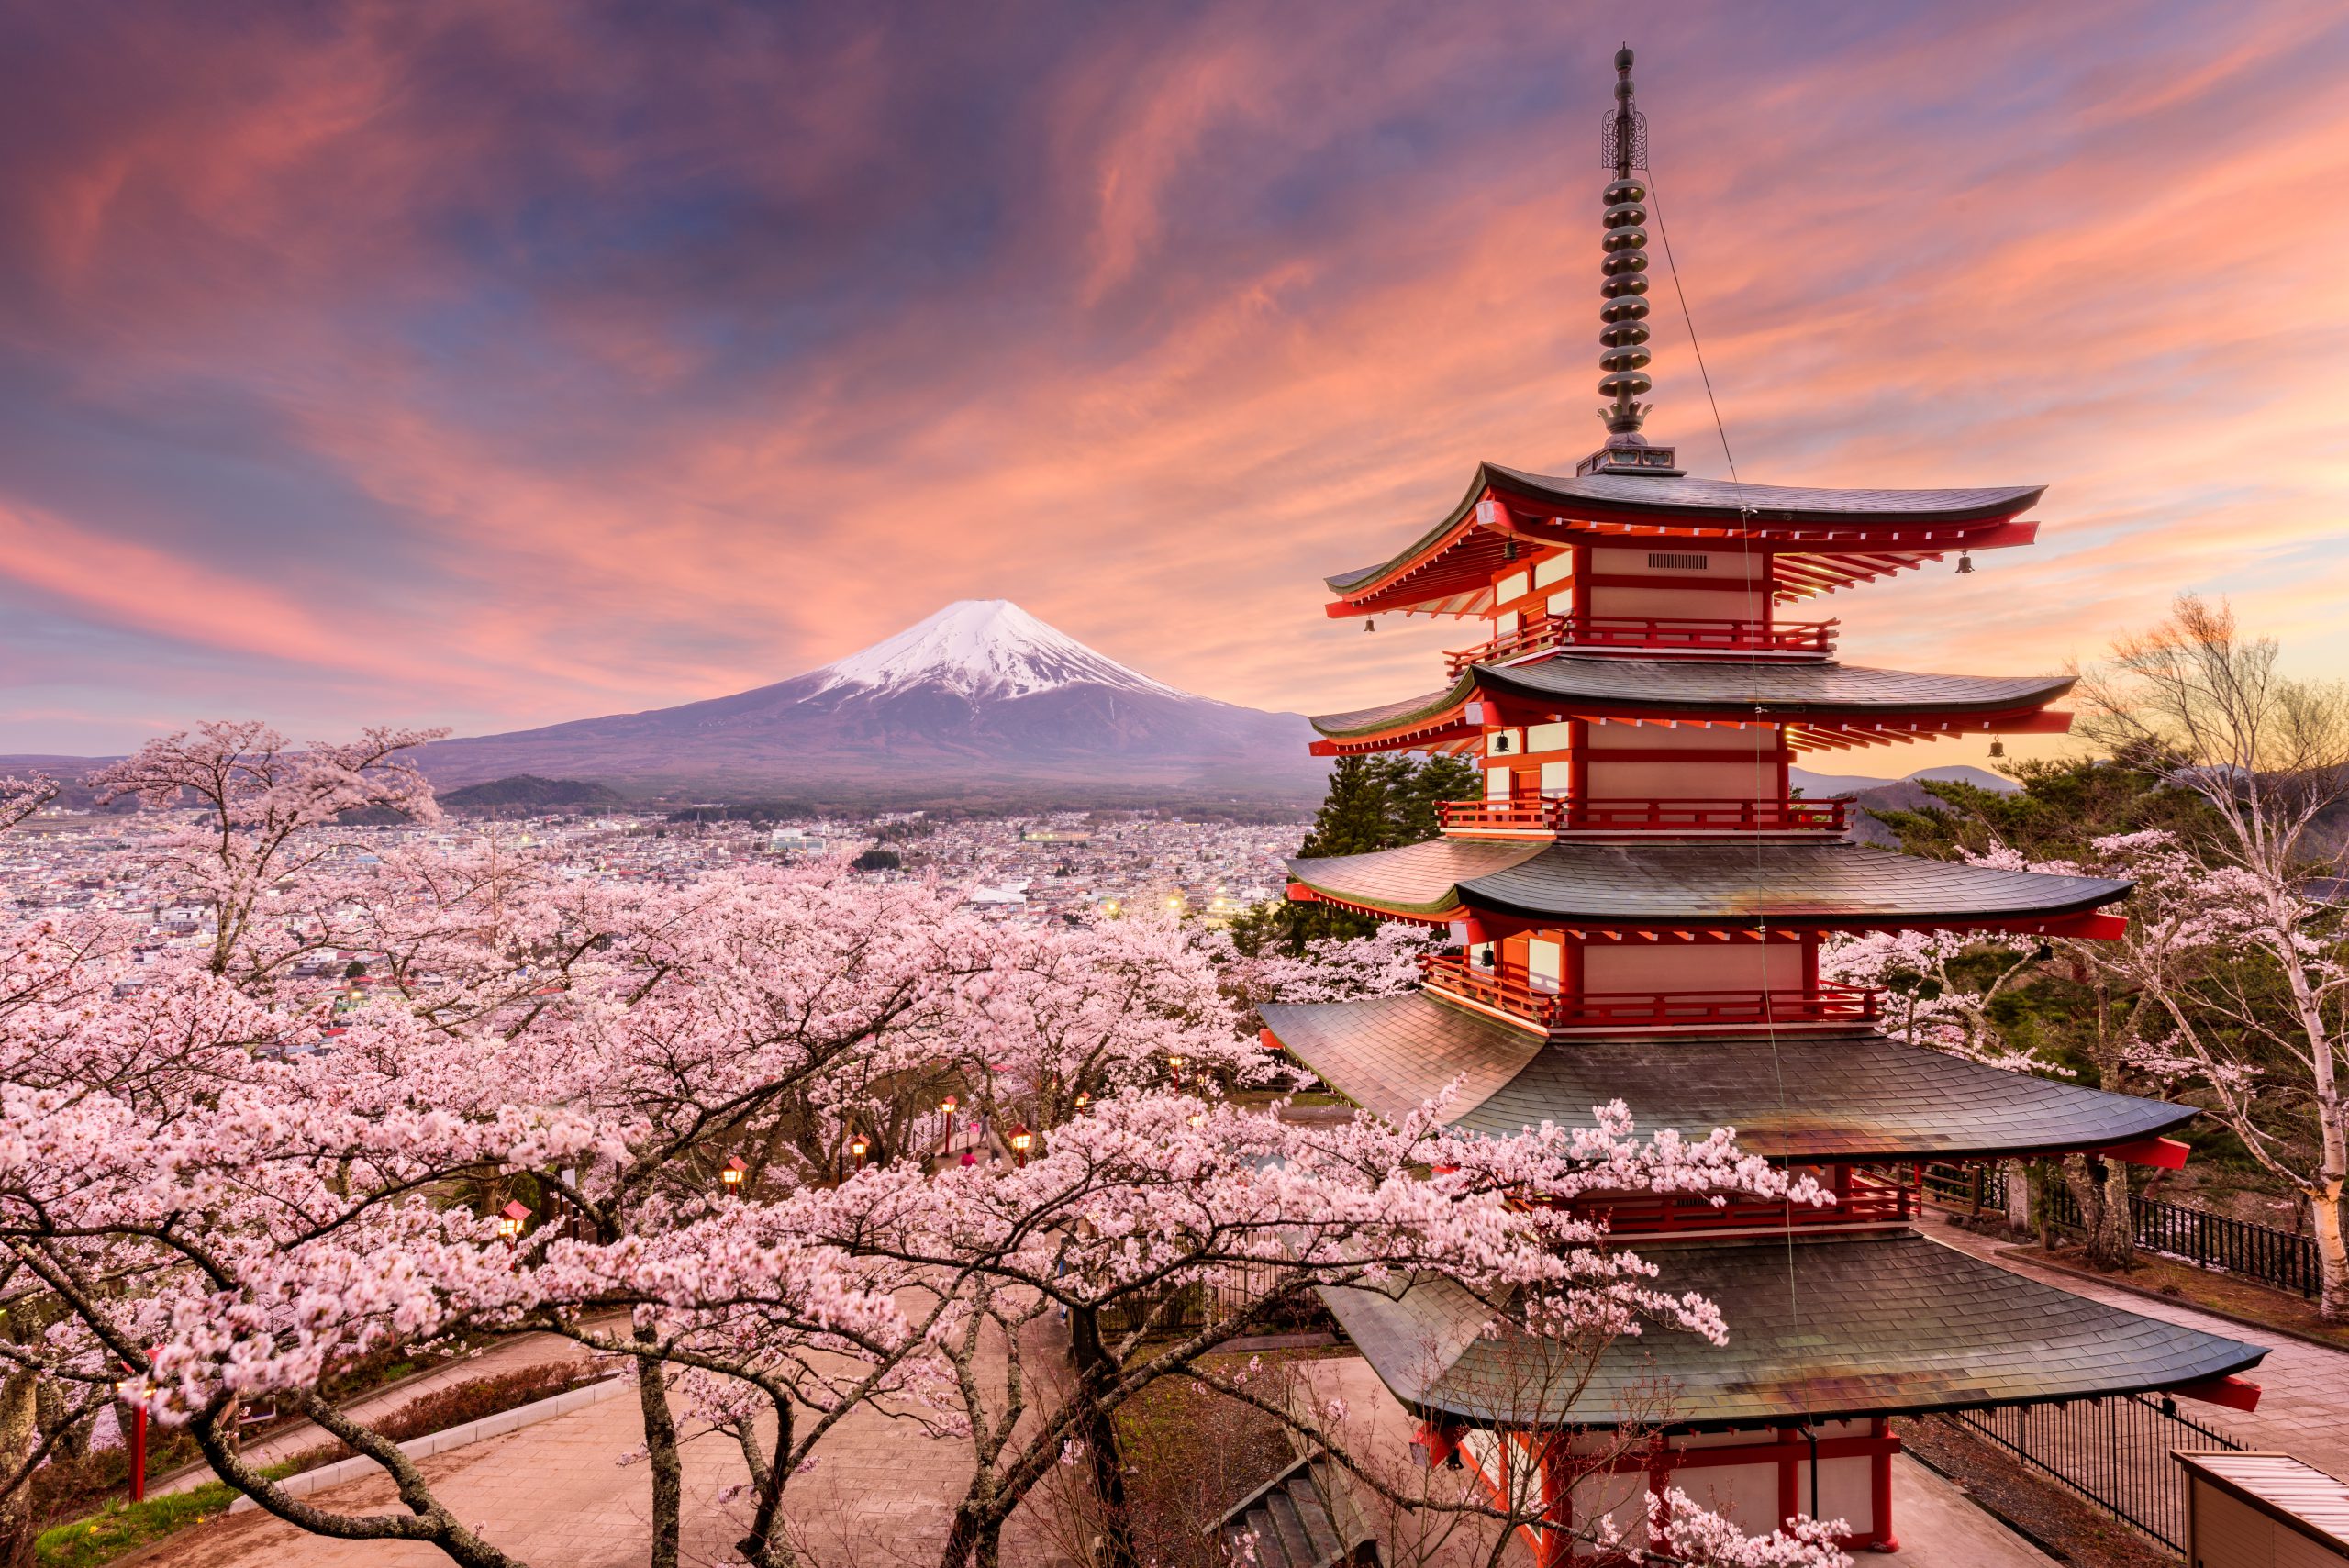 Embark on HAL's Noordam cruise in Japan with flights, hotel stay and tours from $5,999pp